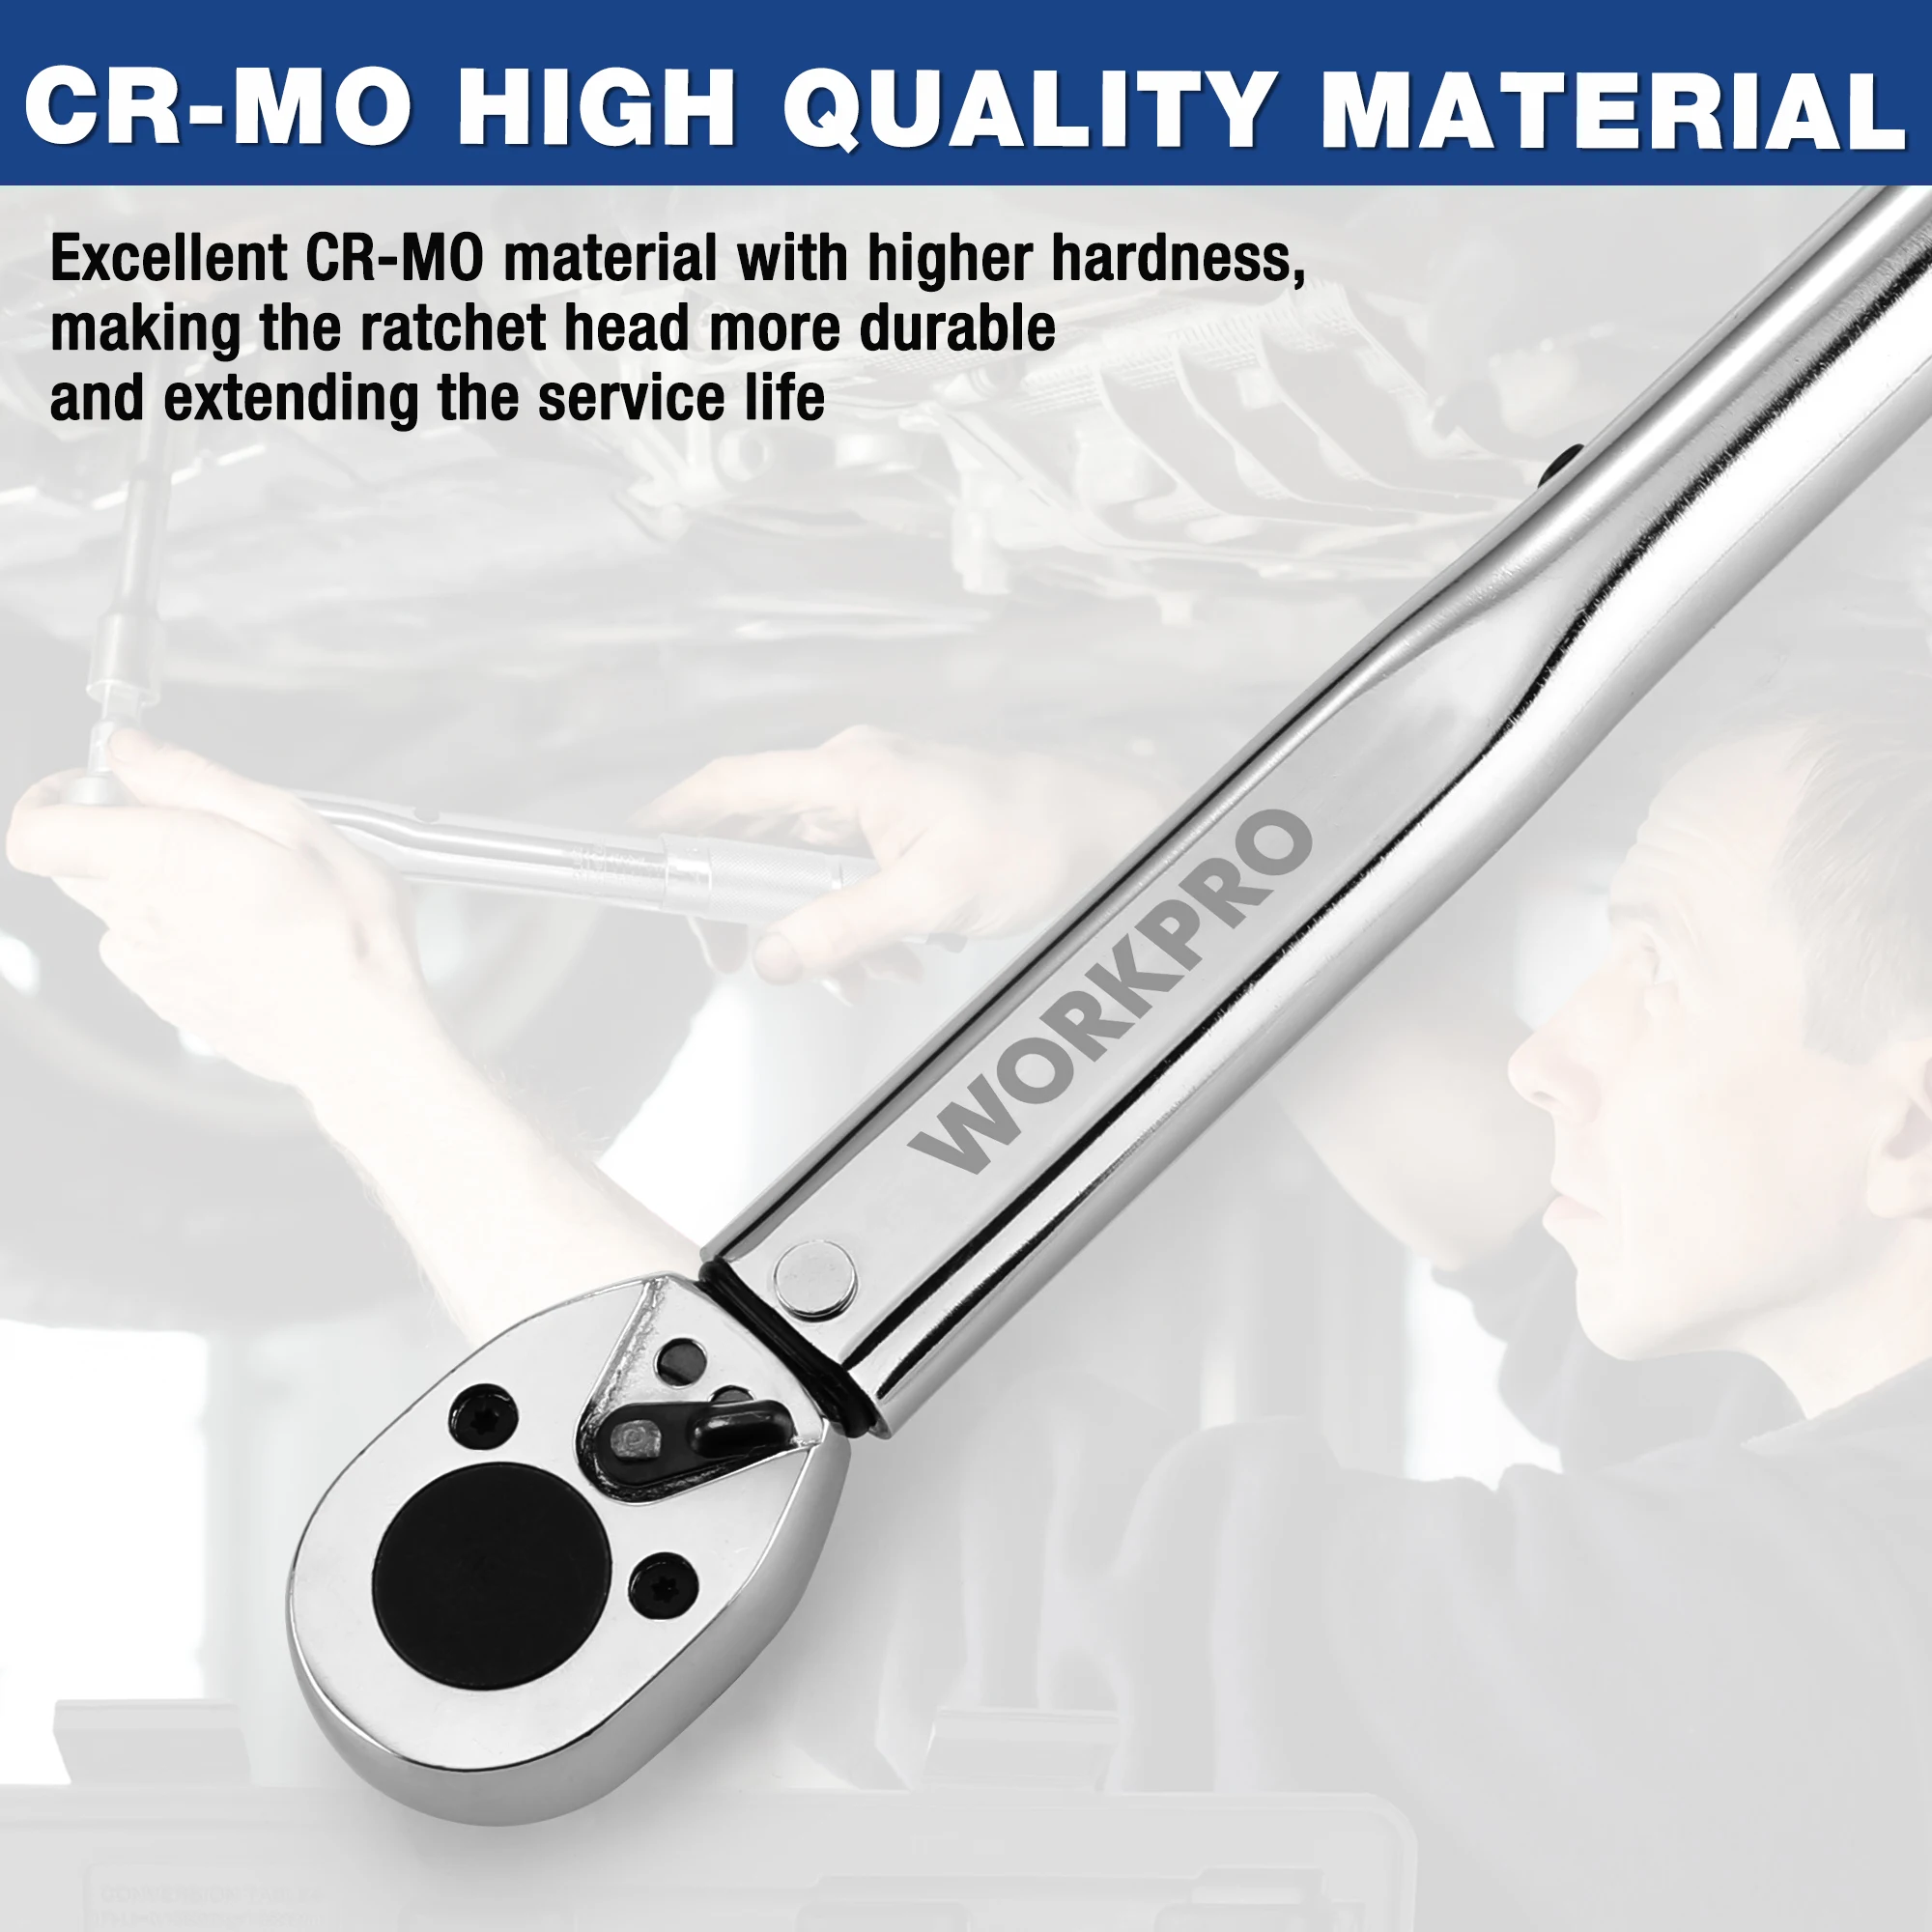 WORKPRO 1/4'' Square Drive Torque Wrench 5-100 Ft-lb 24-Tooth Two-way Precise Ratchet Wrench Repair Spanner Key